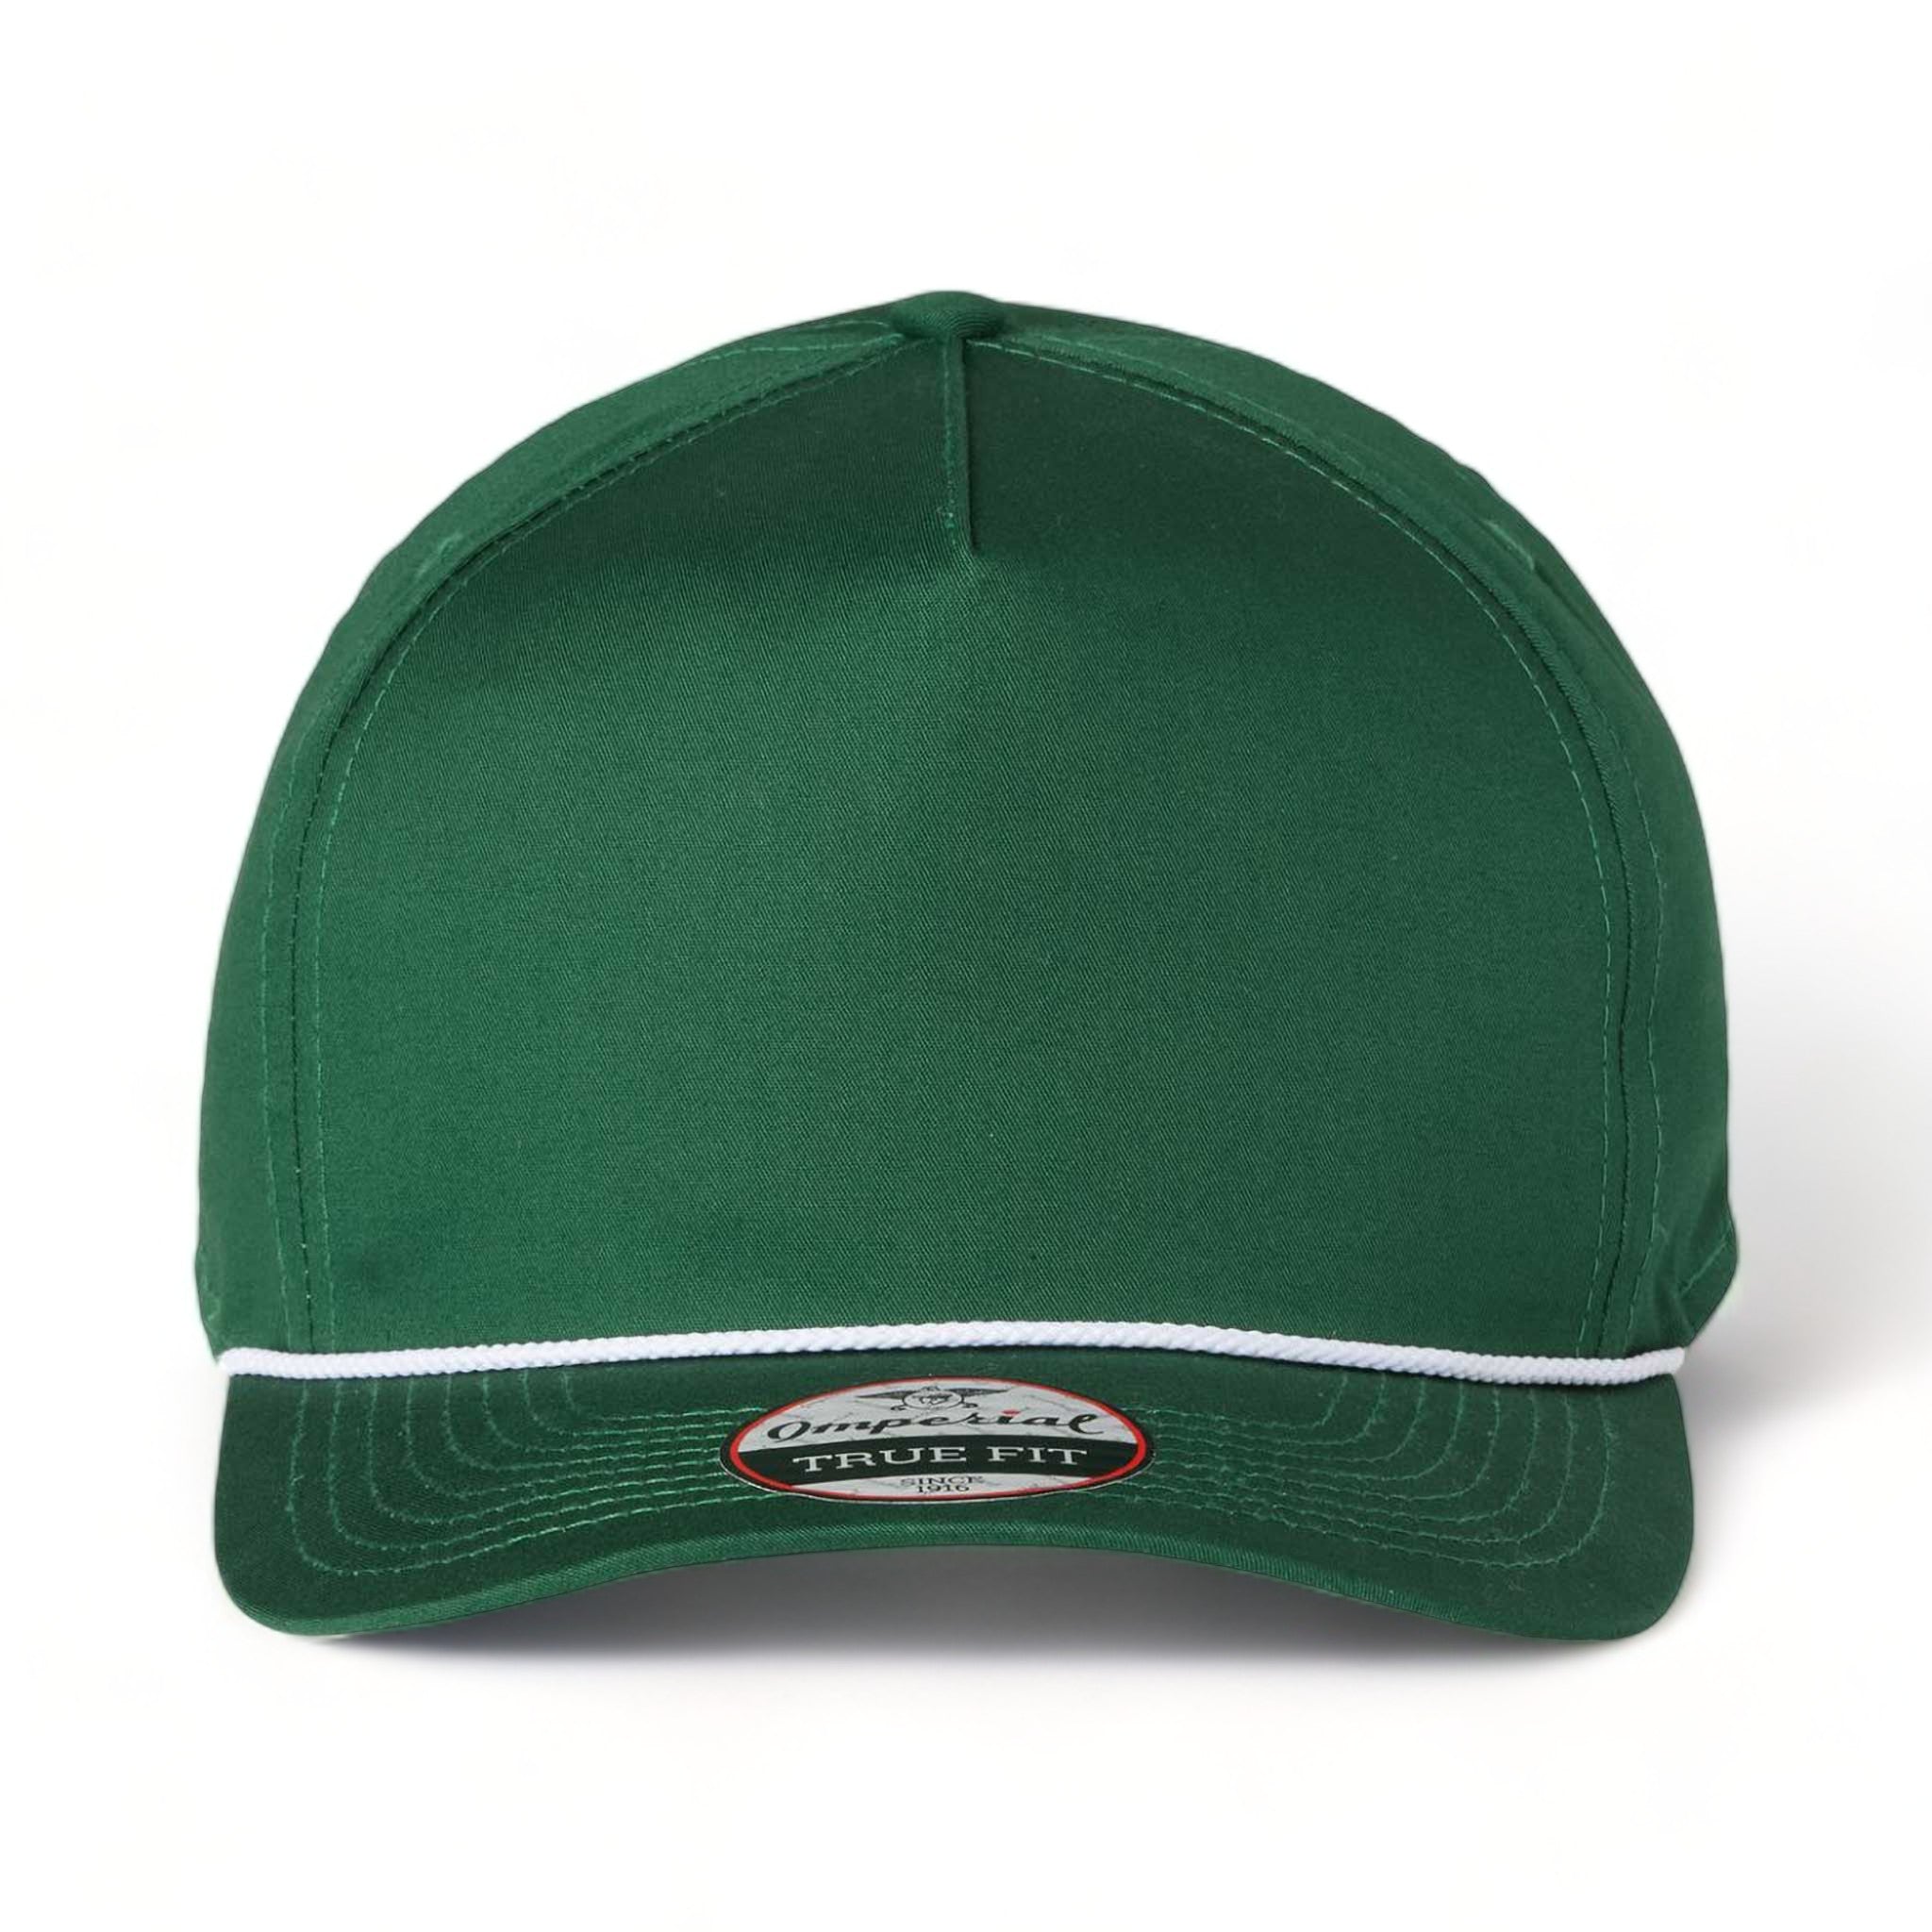 Front view of Imperial 5056 custom hat in forest and white